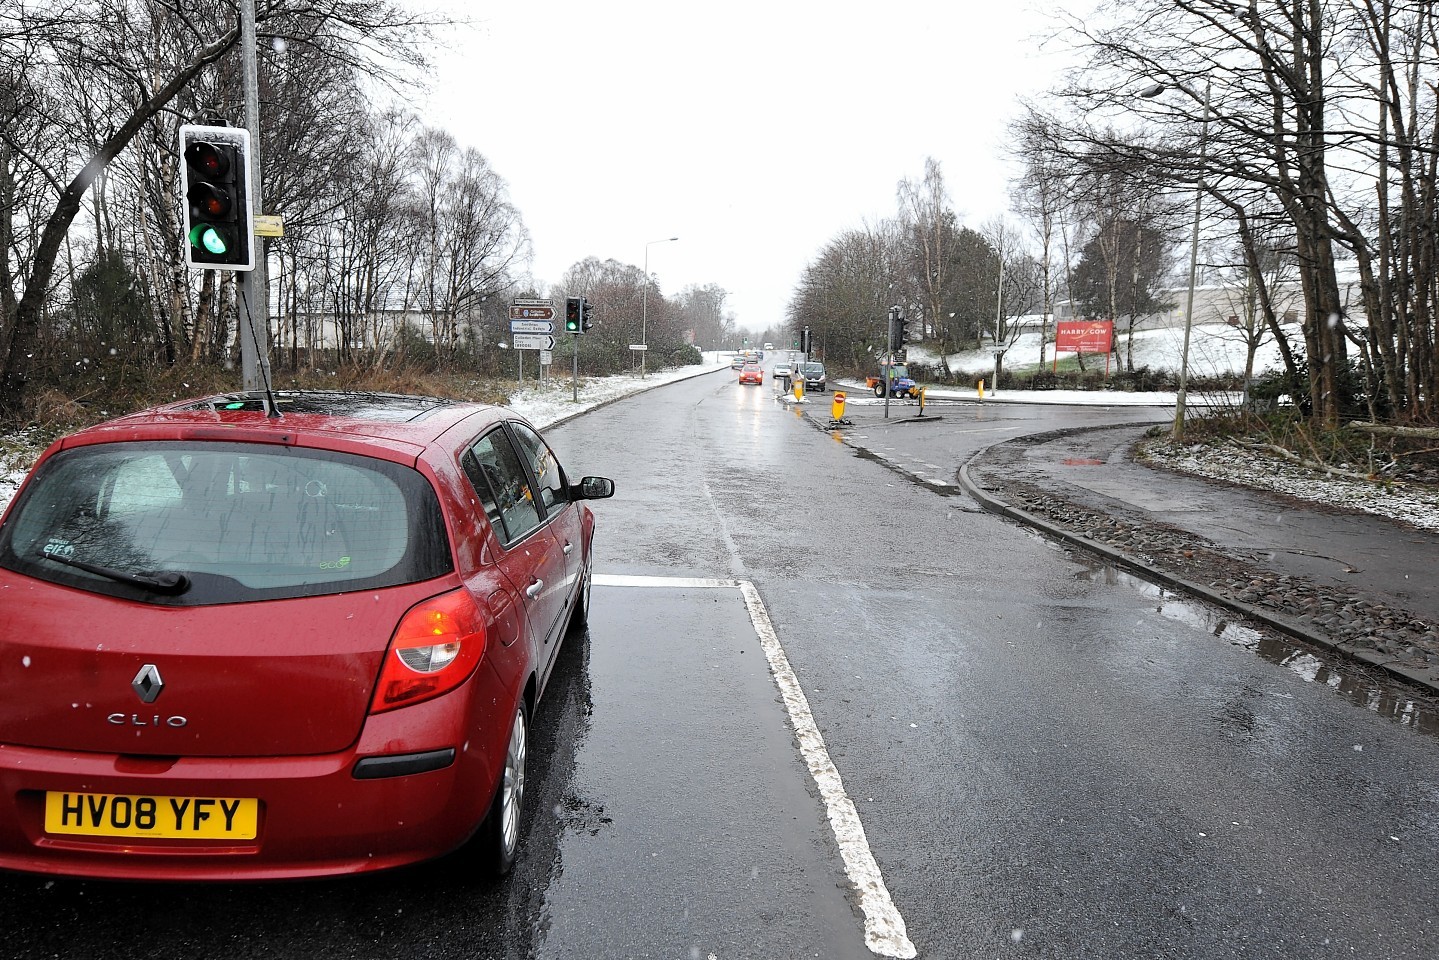 Work is to be carried out on the blackspot at Barn Church Road